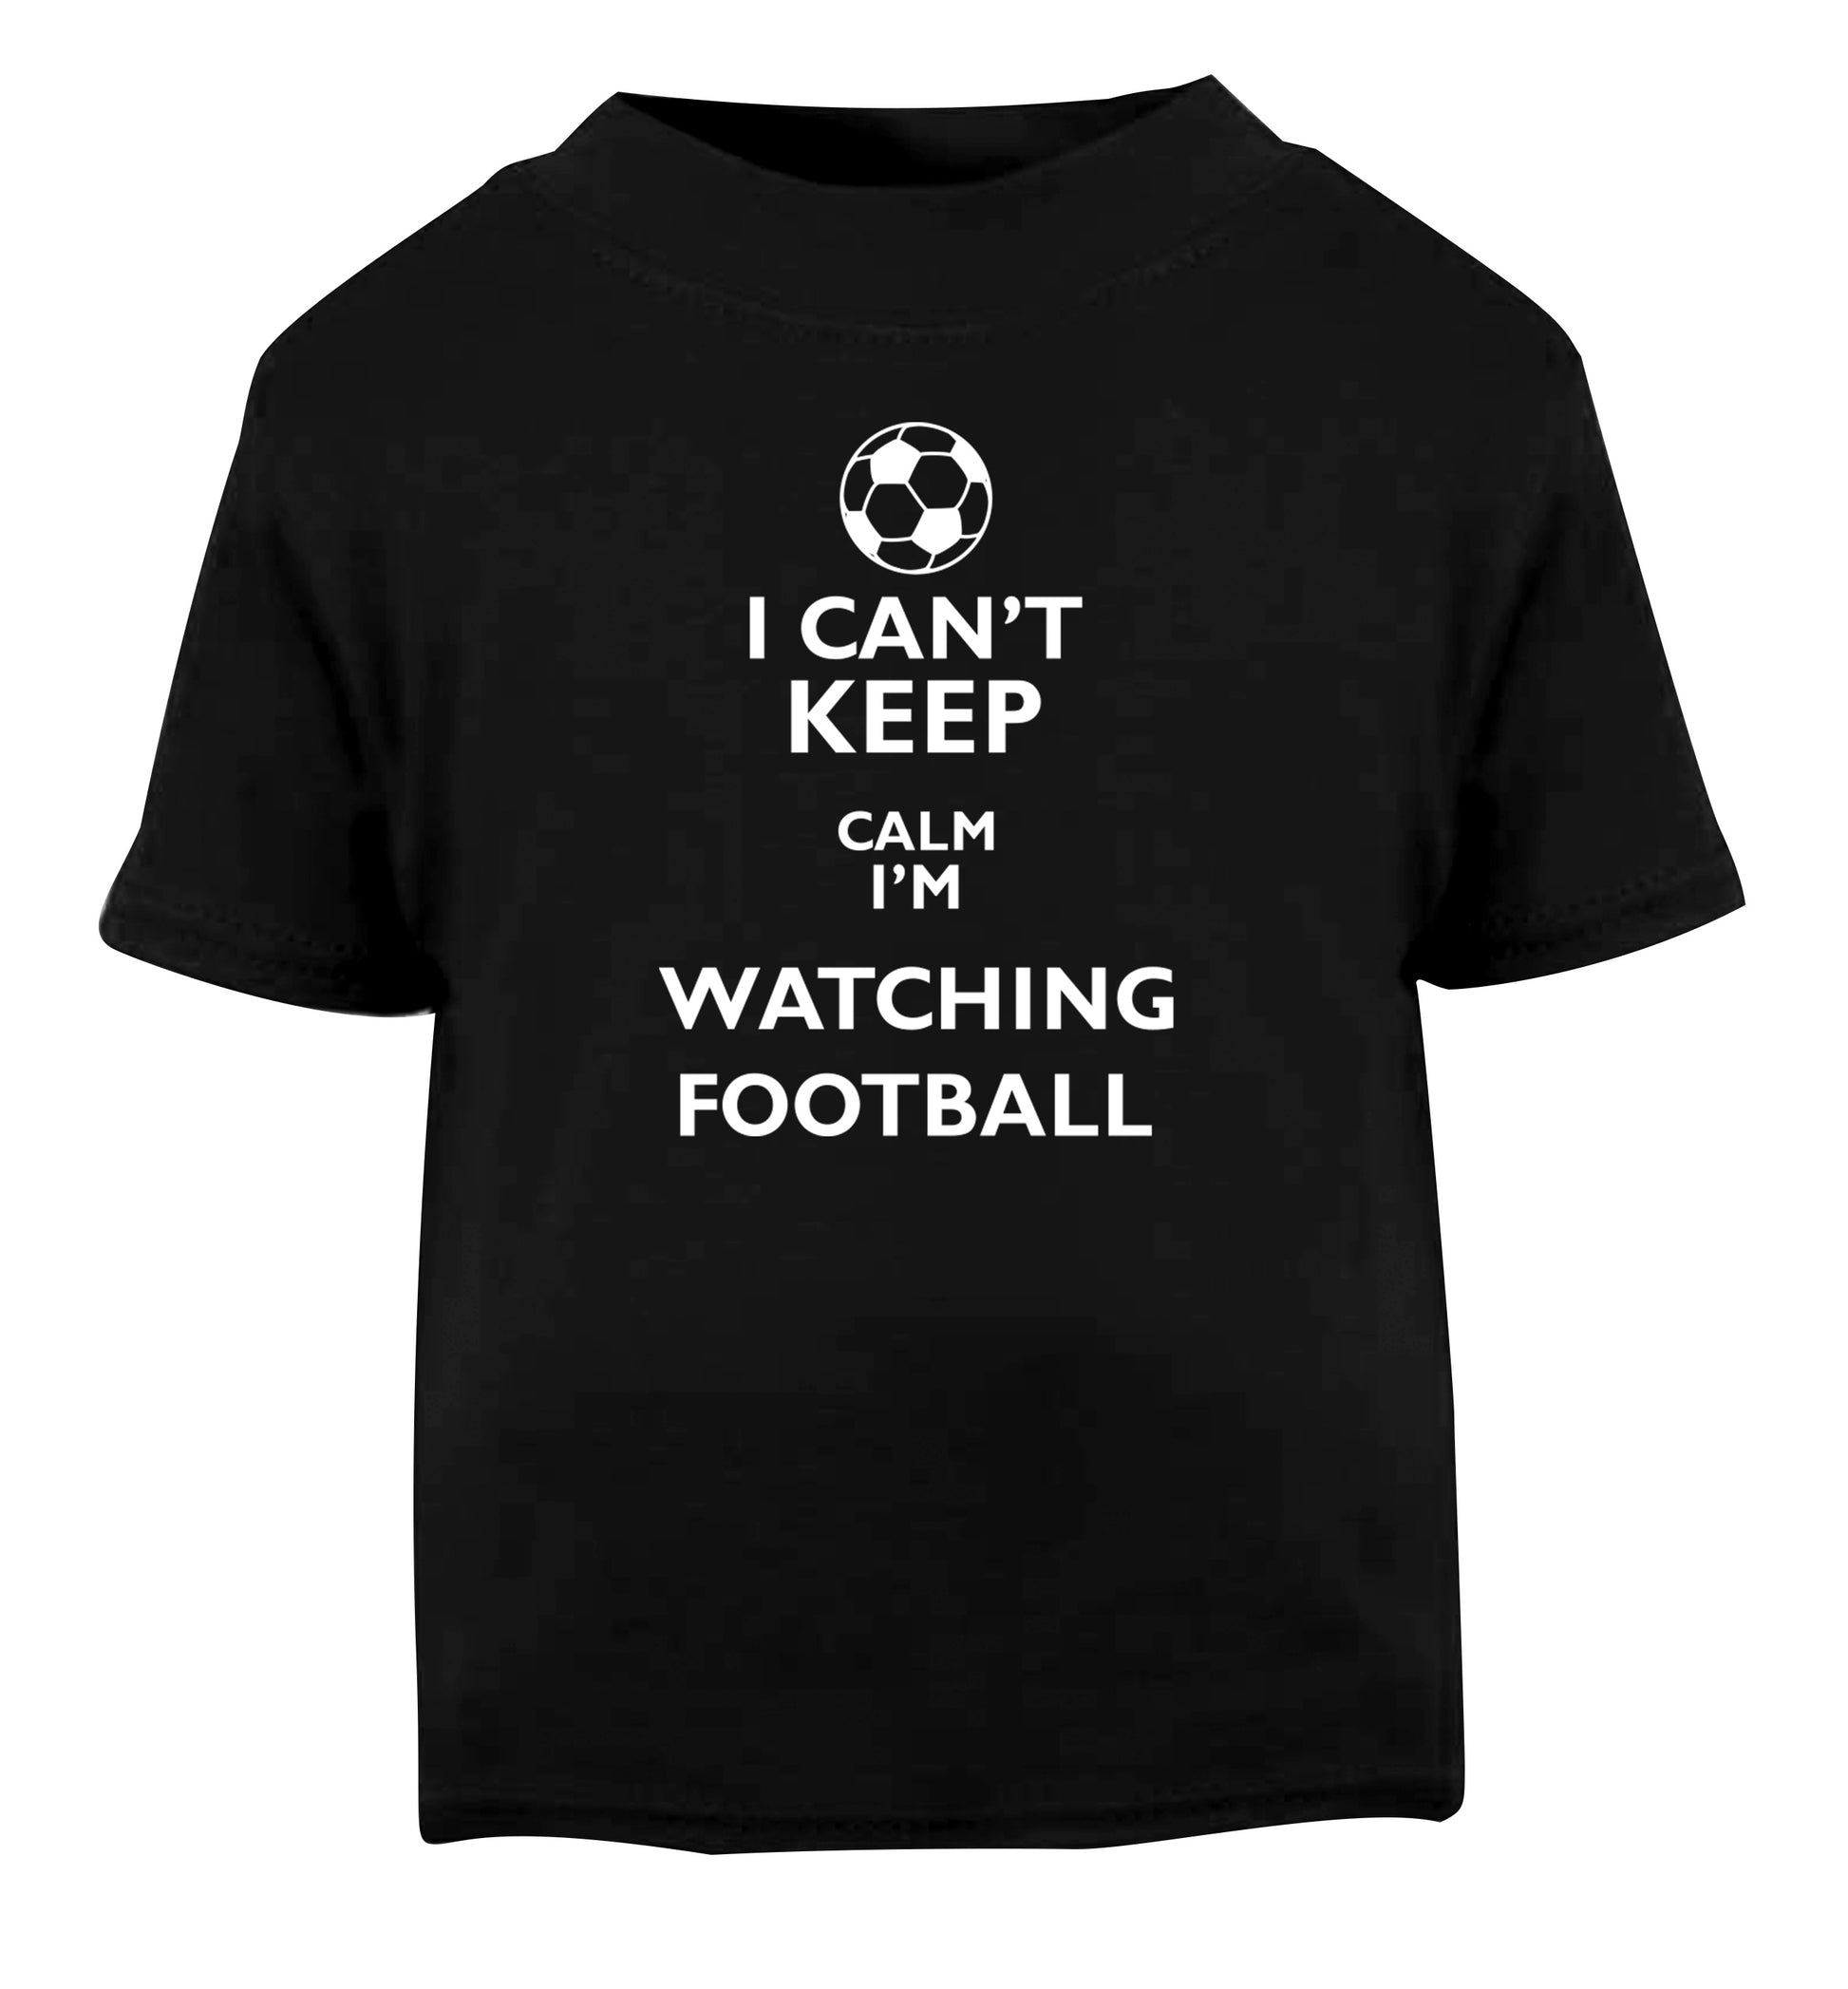 I can't keep calm I'm watching the football Black Baby Toddler Tshirt 2 years